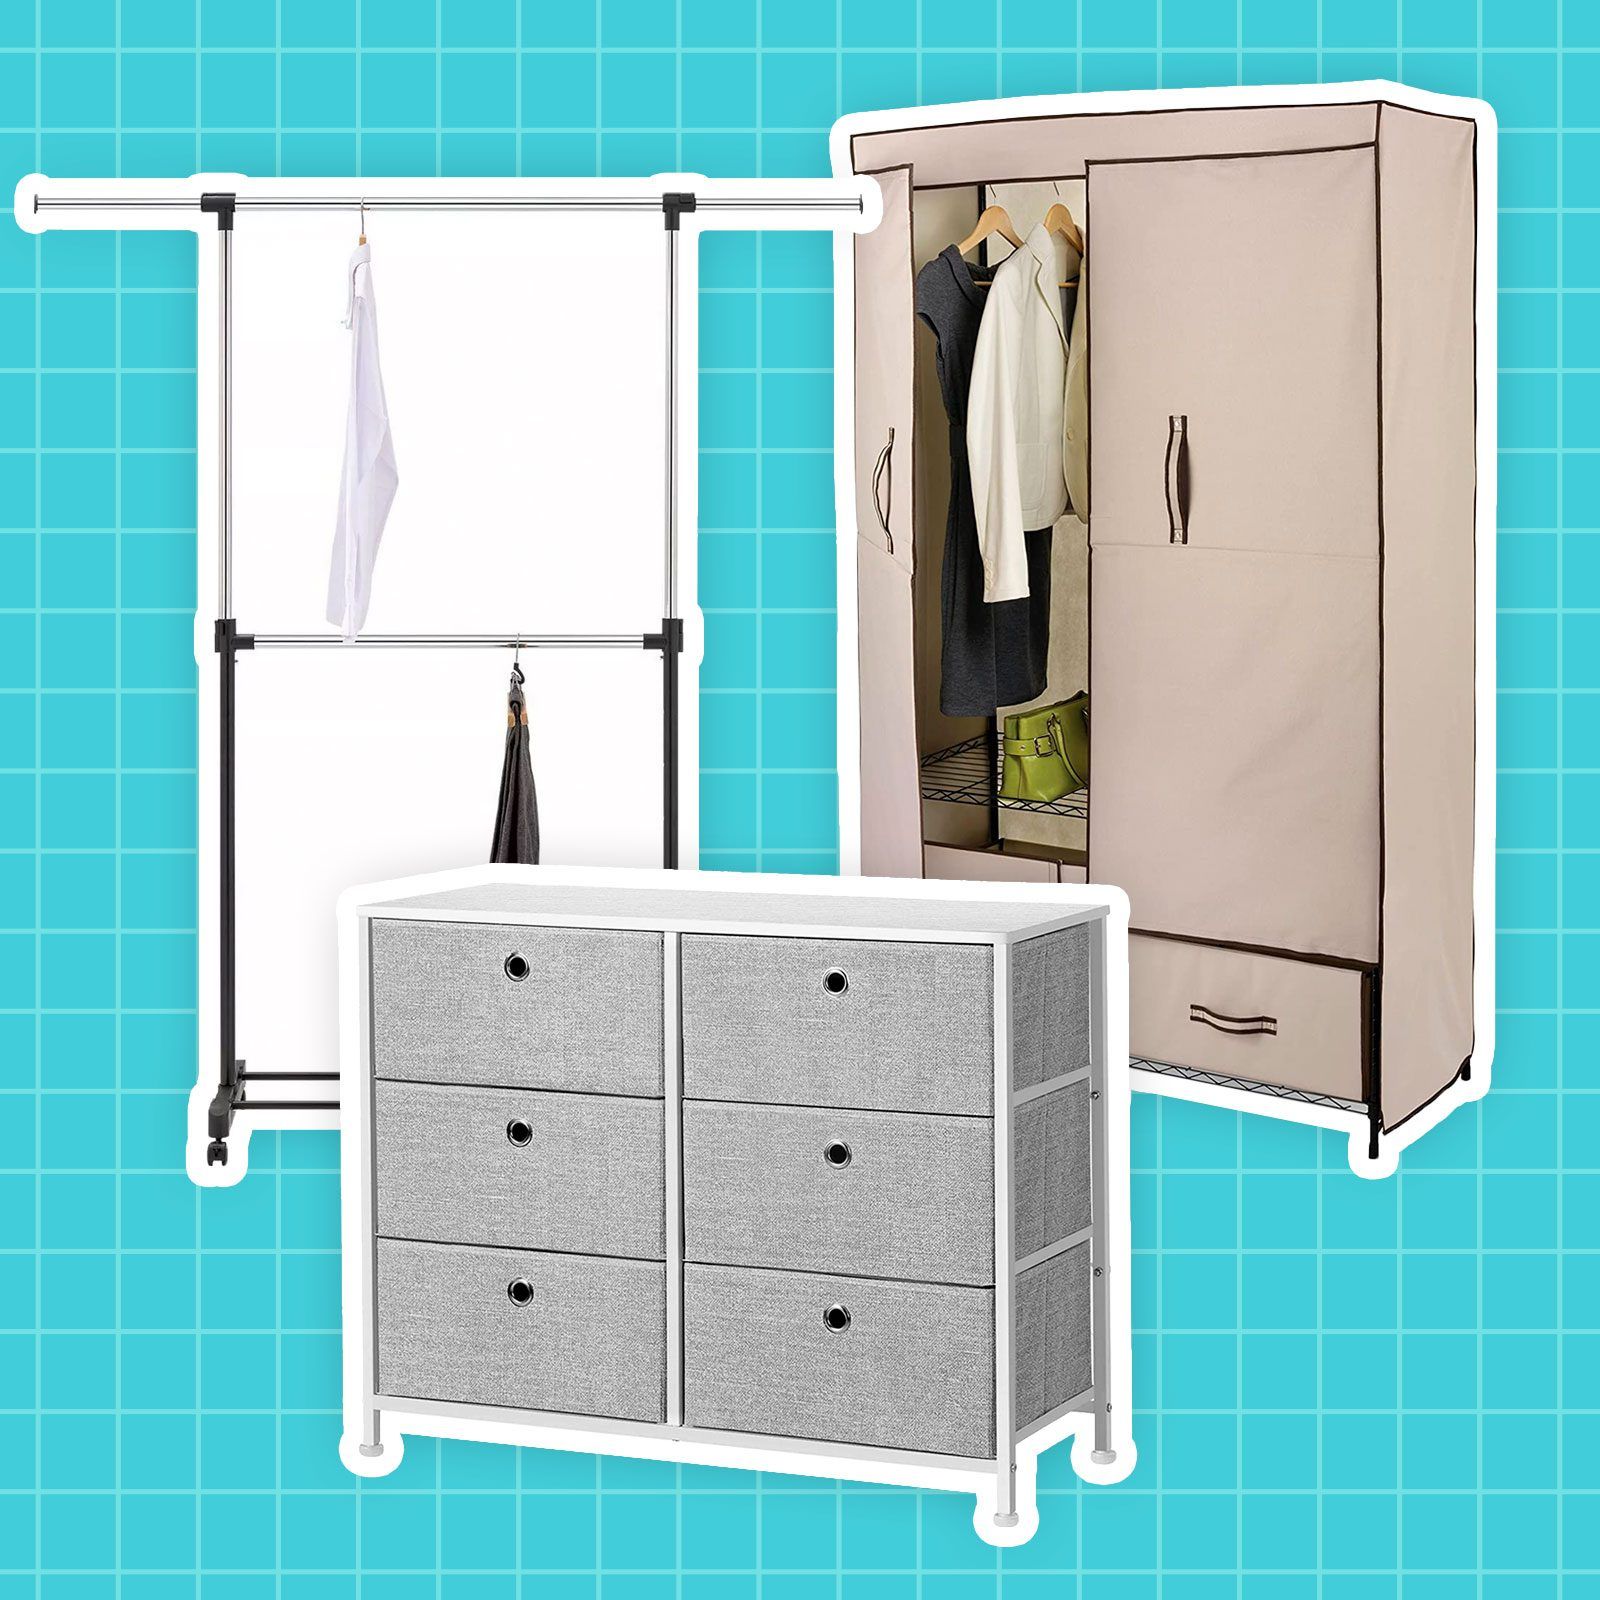 10 Best Portable Closets For Every Space 2021 | Reader's Digest Intended For Portable Wardrobes (Gallery 17 of 20)